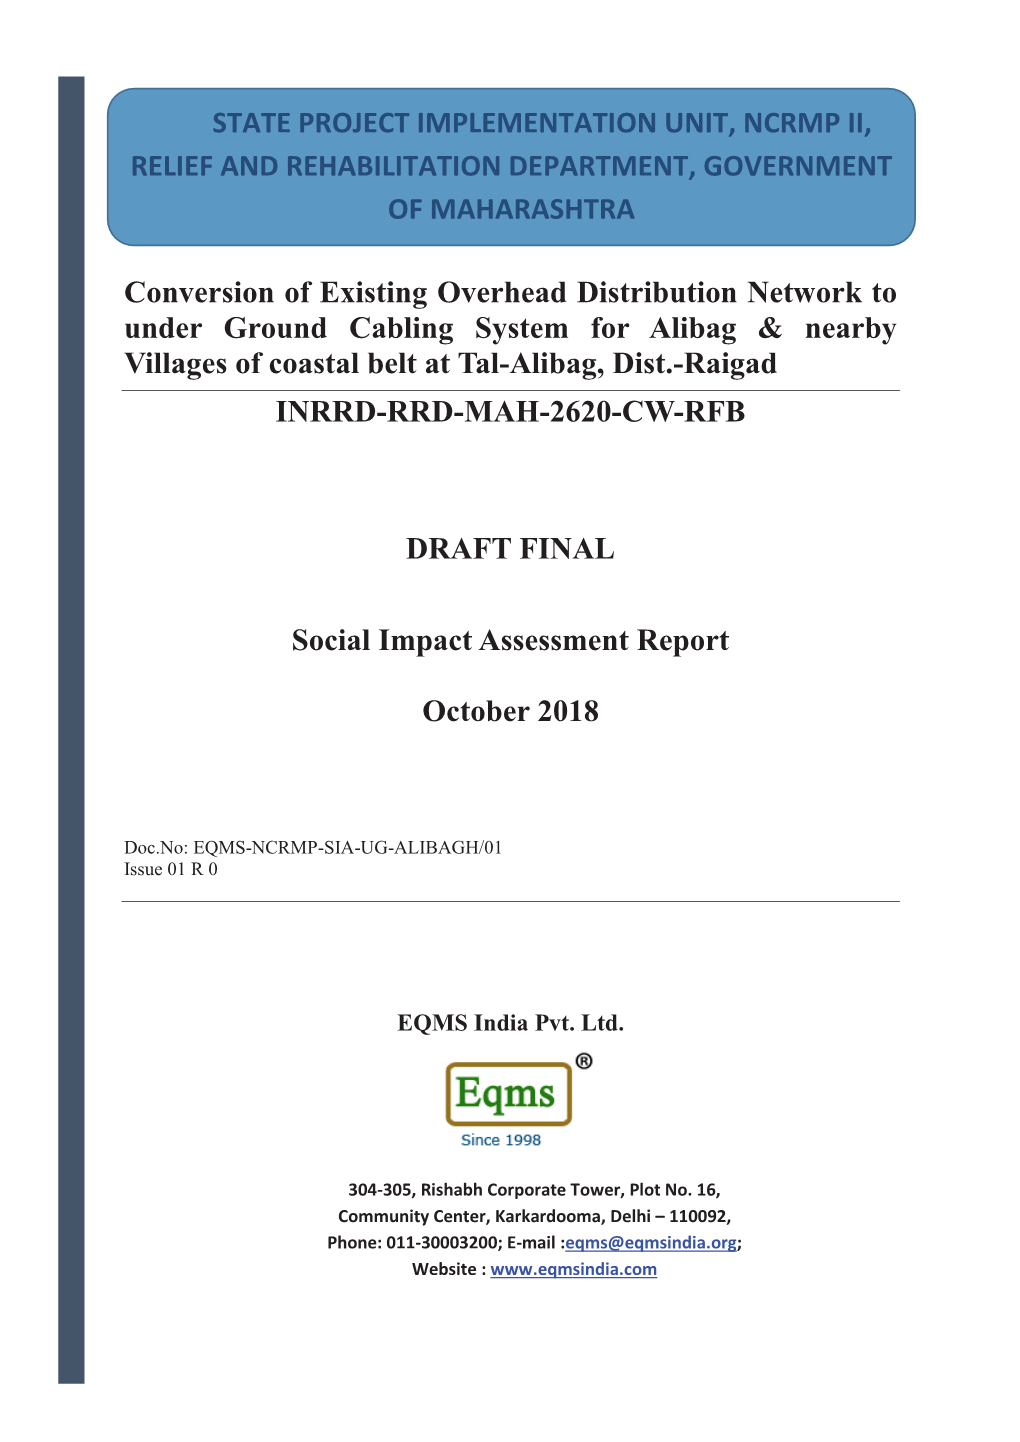 Conversion of Existing Overhead Distribution Network to Under